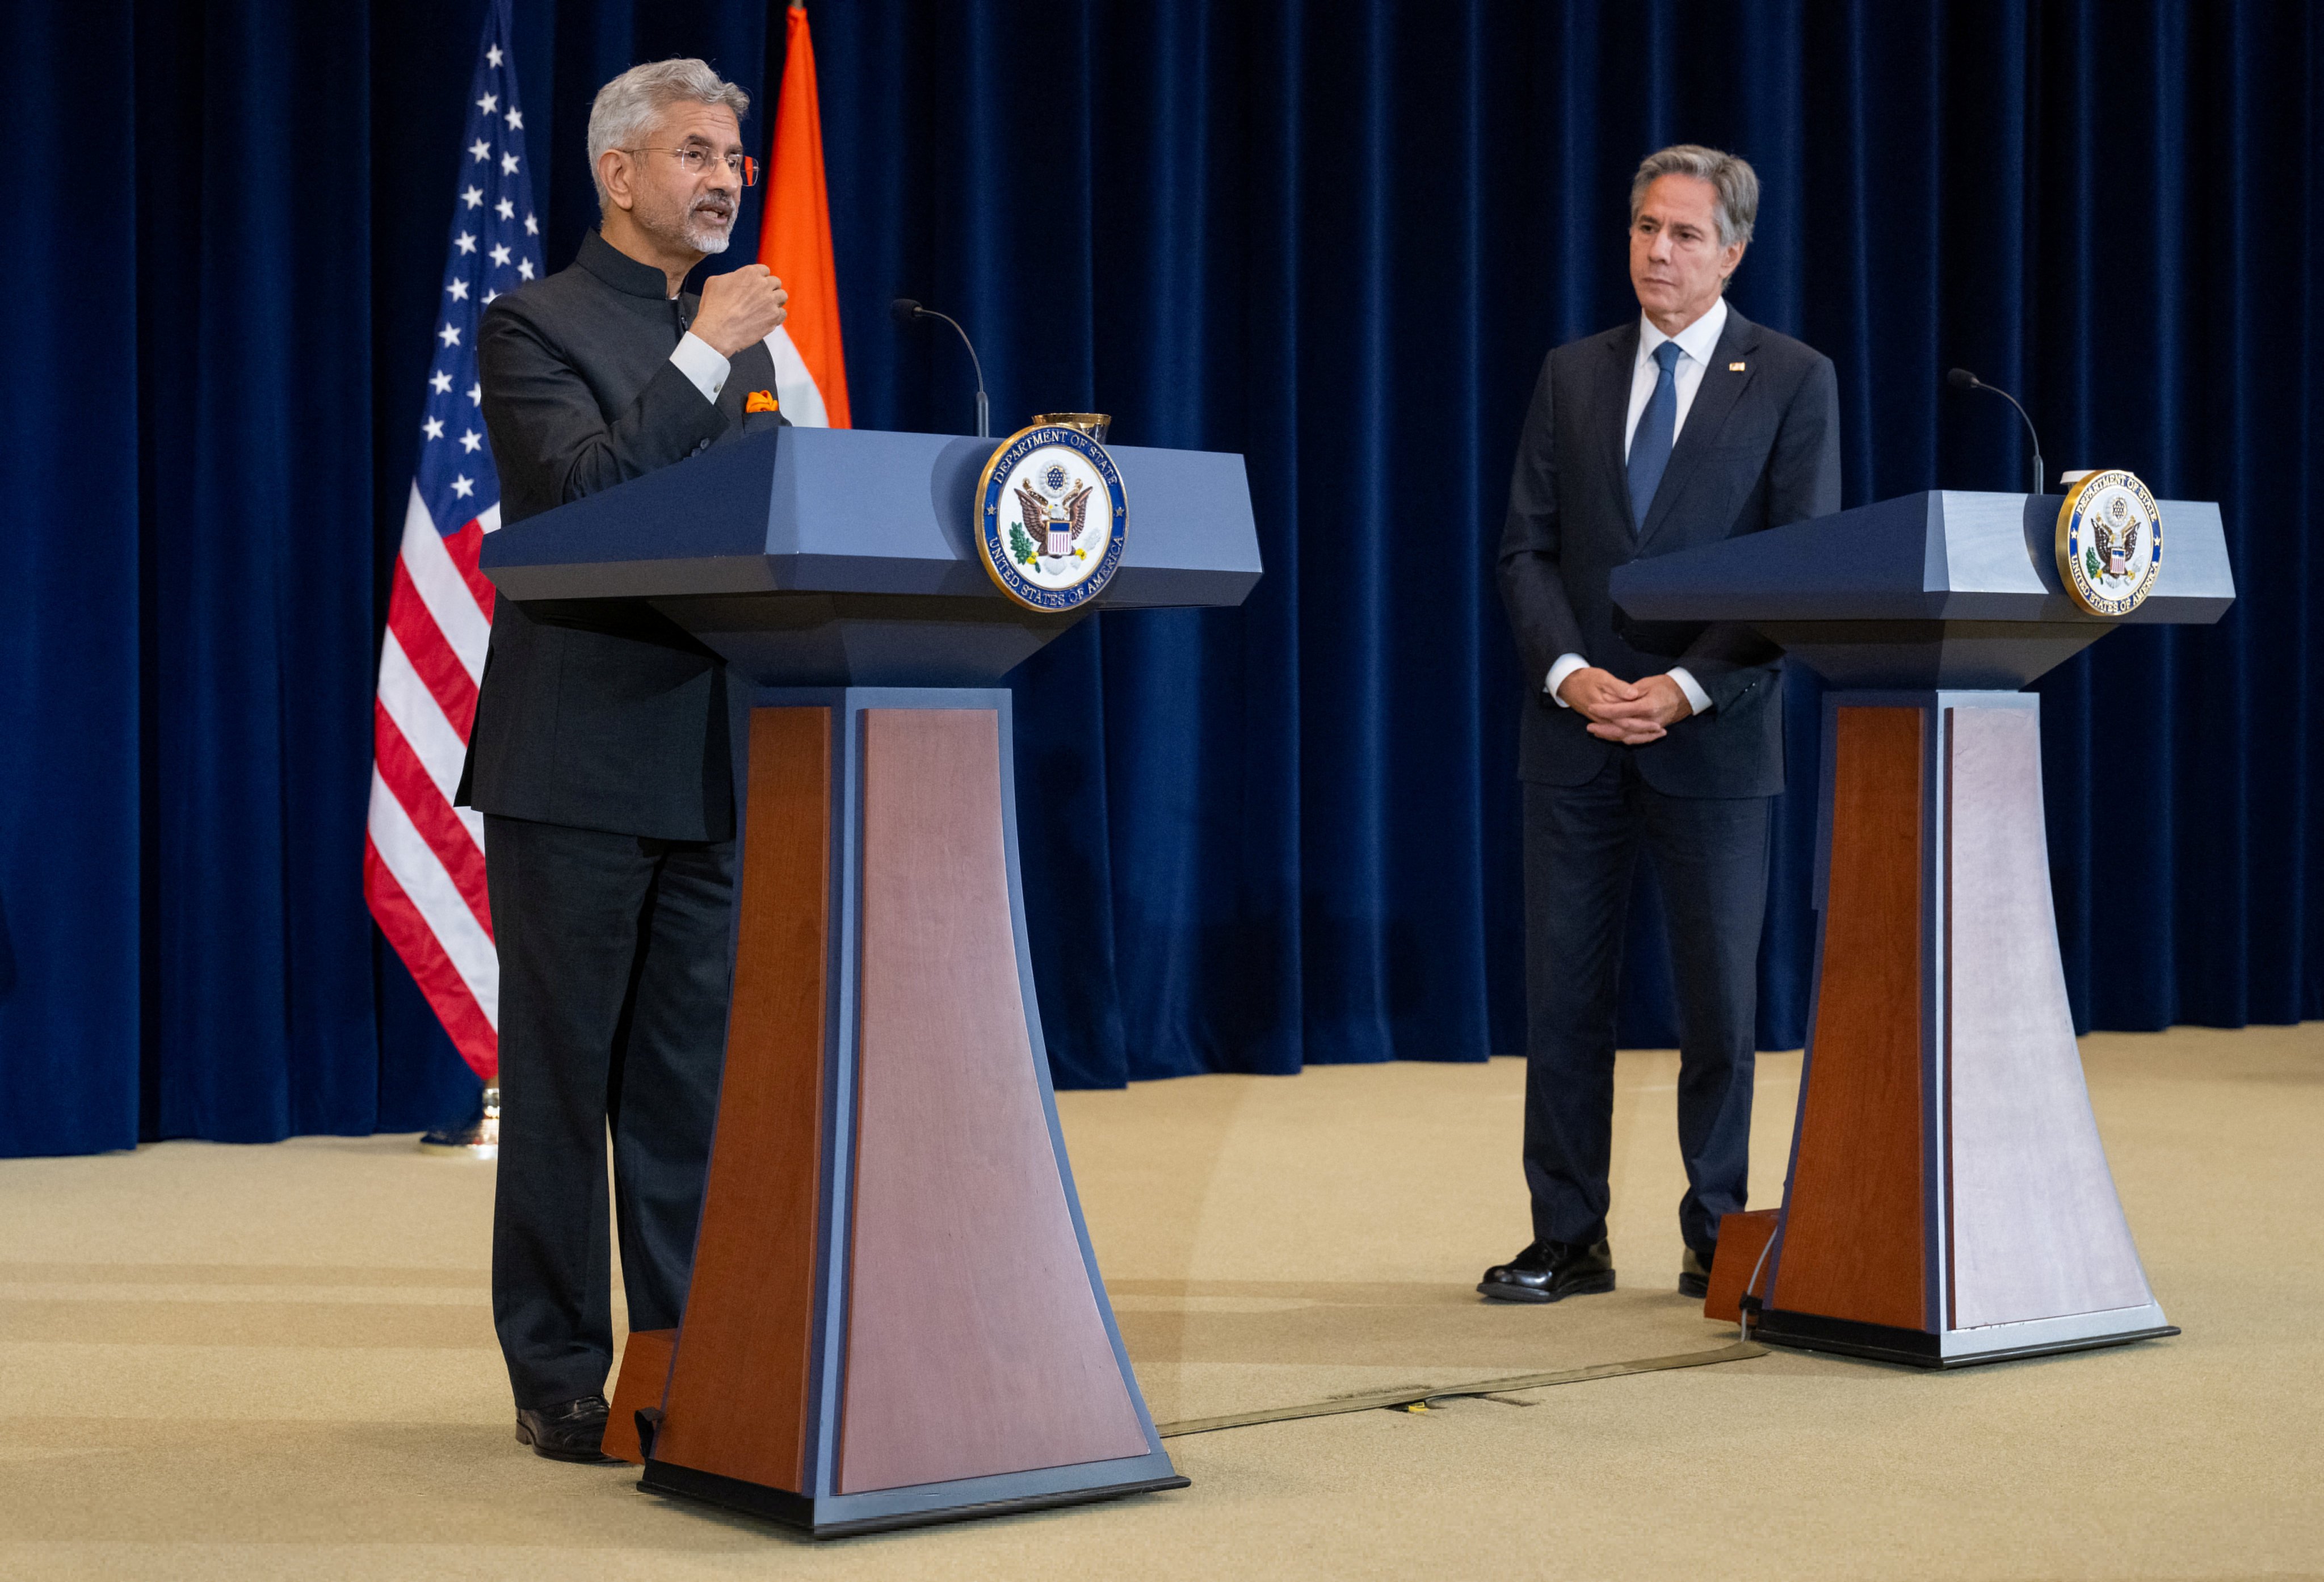 Indian External Affairs Minister Subrahmanyam Jaishankar talks at a press conference as US Secretary of State Antony Blinken listens following meetings at the State Department in Washington on September 27. Photo: Reuters